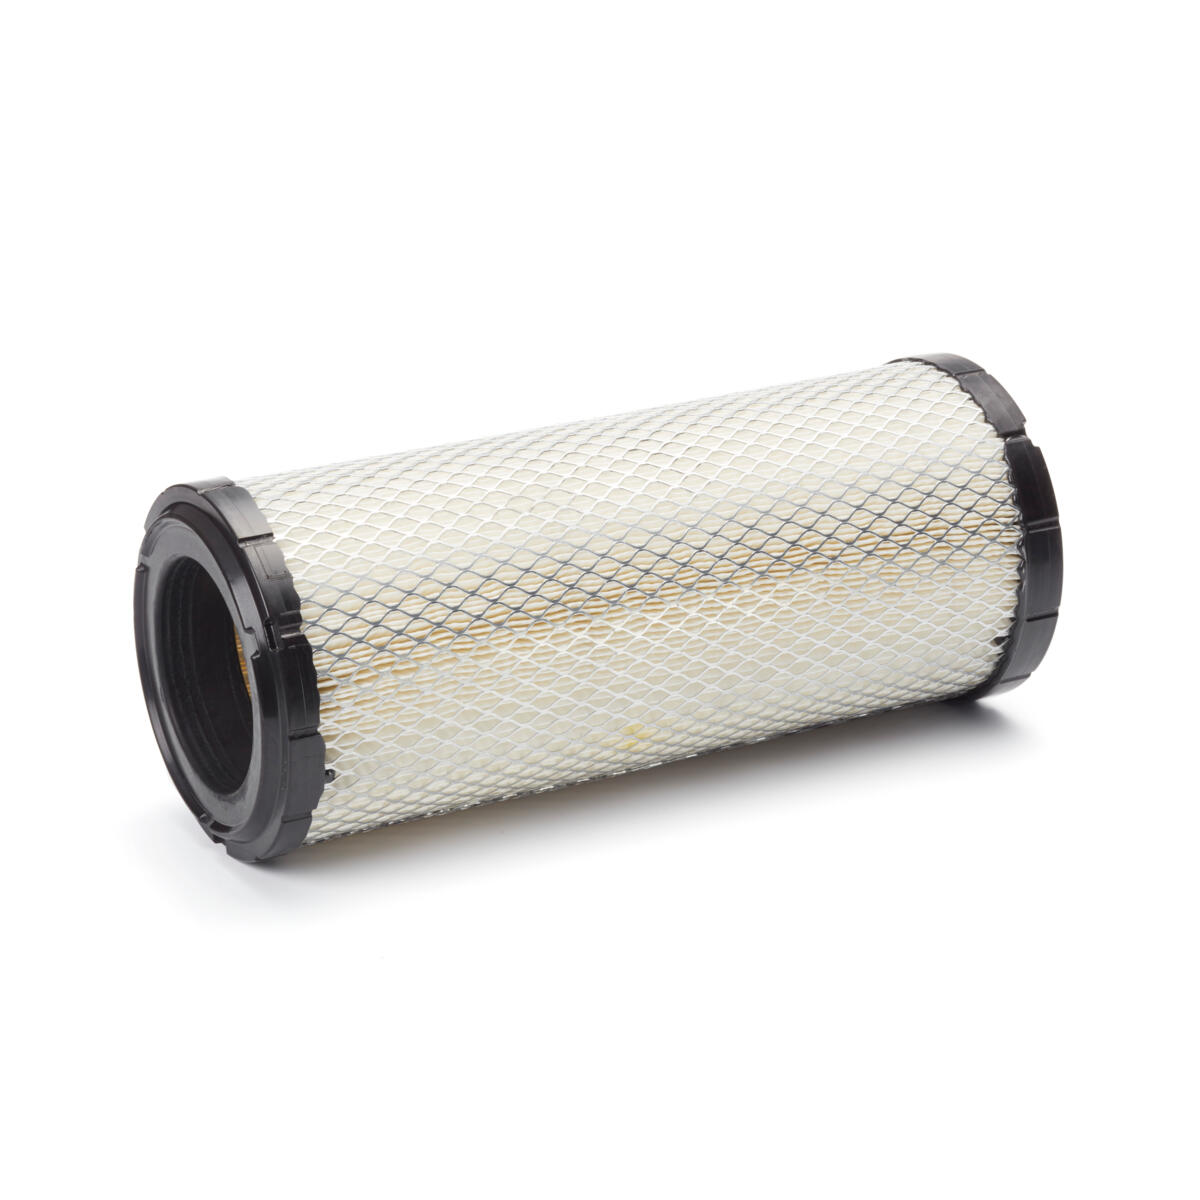 Replacement air filter for YXz1000 turbo kit